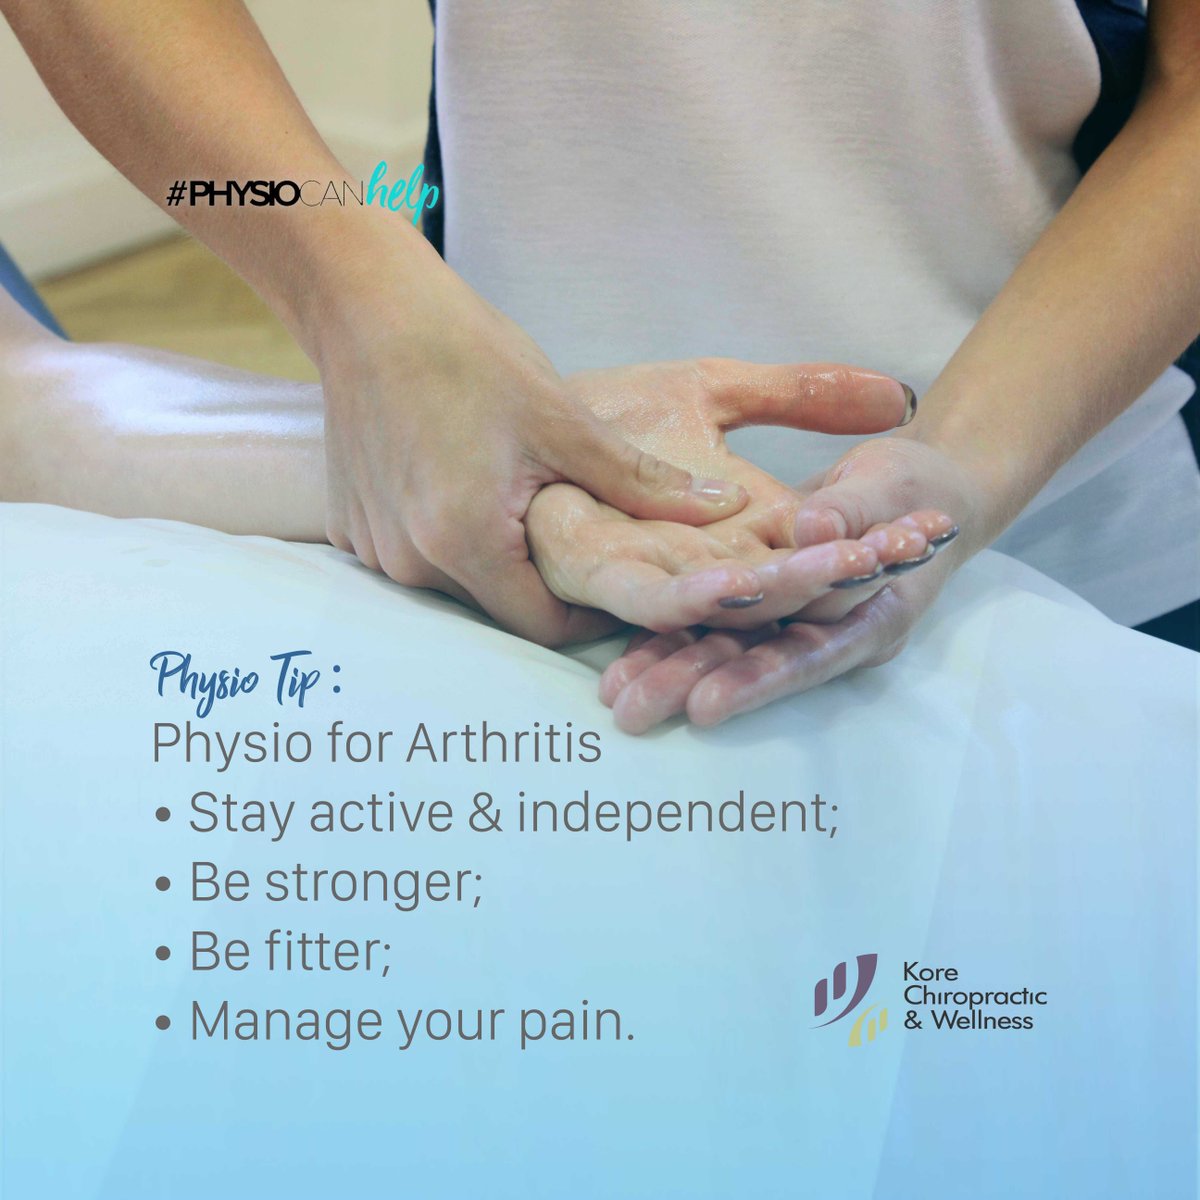 🏃‍♀ #PhysioTip 🏃‍♂️ 

Physio for #Arthritis 
• Stay active & independent;
• Be stronger; 💪
• Be fitter;
• Manage your pain.

👐 #PhysioCanHelp #PhysioHelpsLives 
💆 #physio #physiotherapy #physicaltherapy
@KoreChiro buff.ly/2RAfxqZ